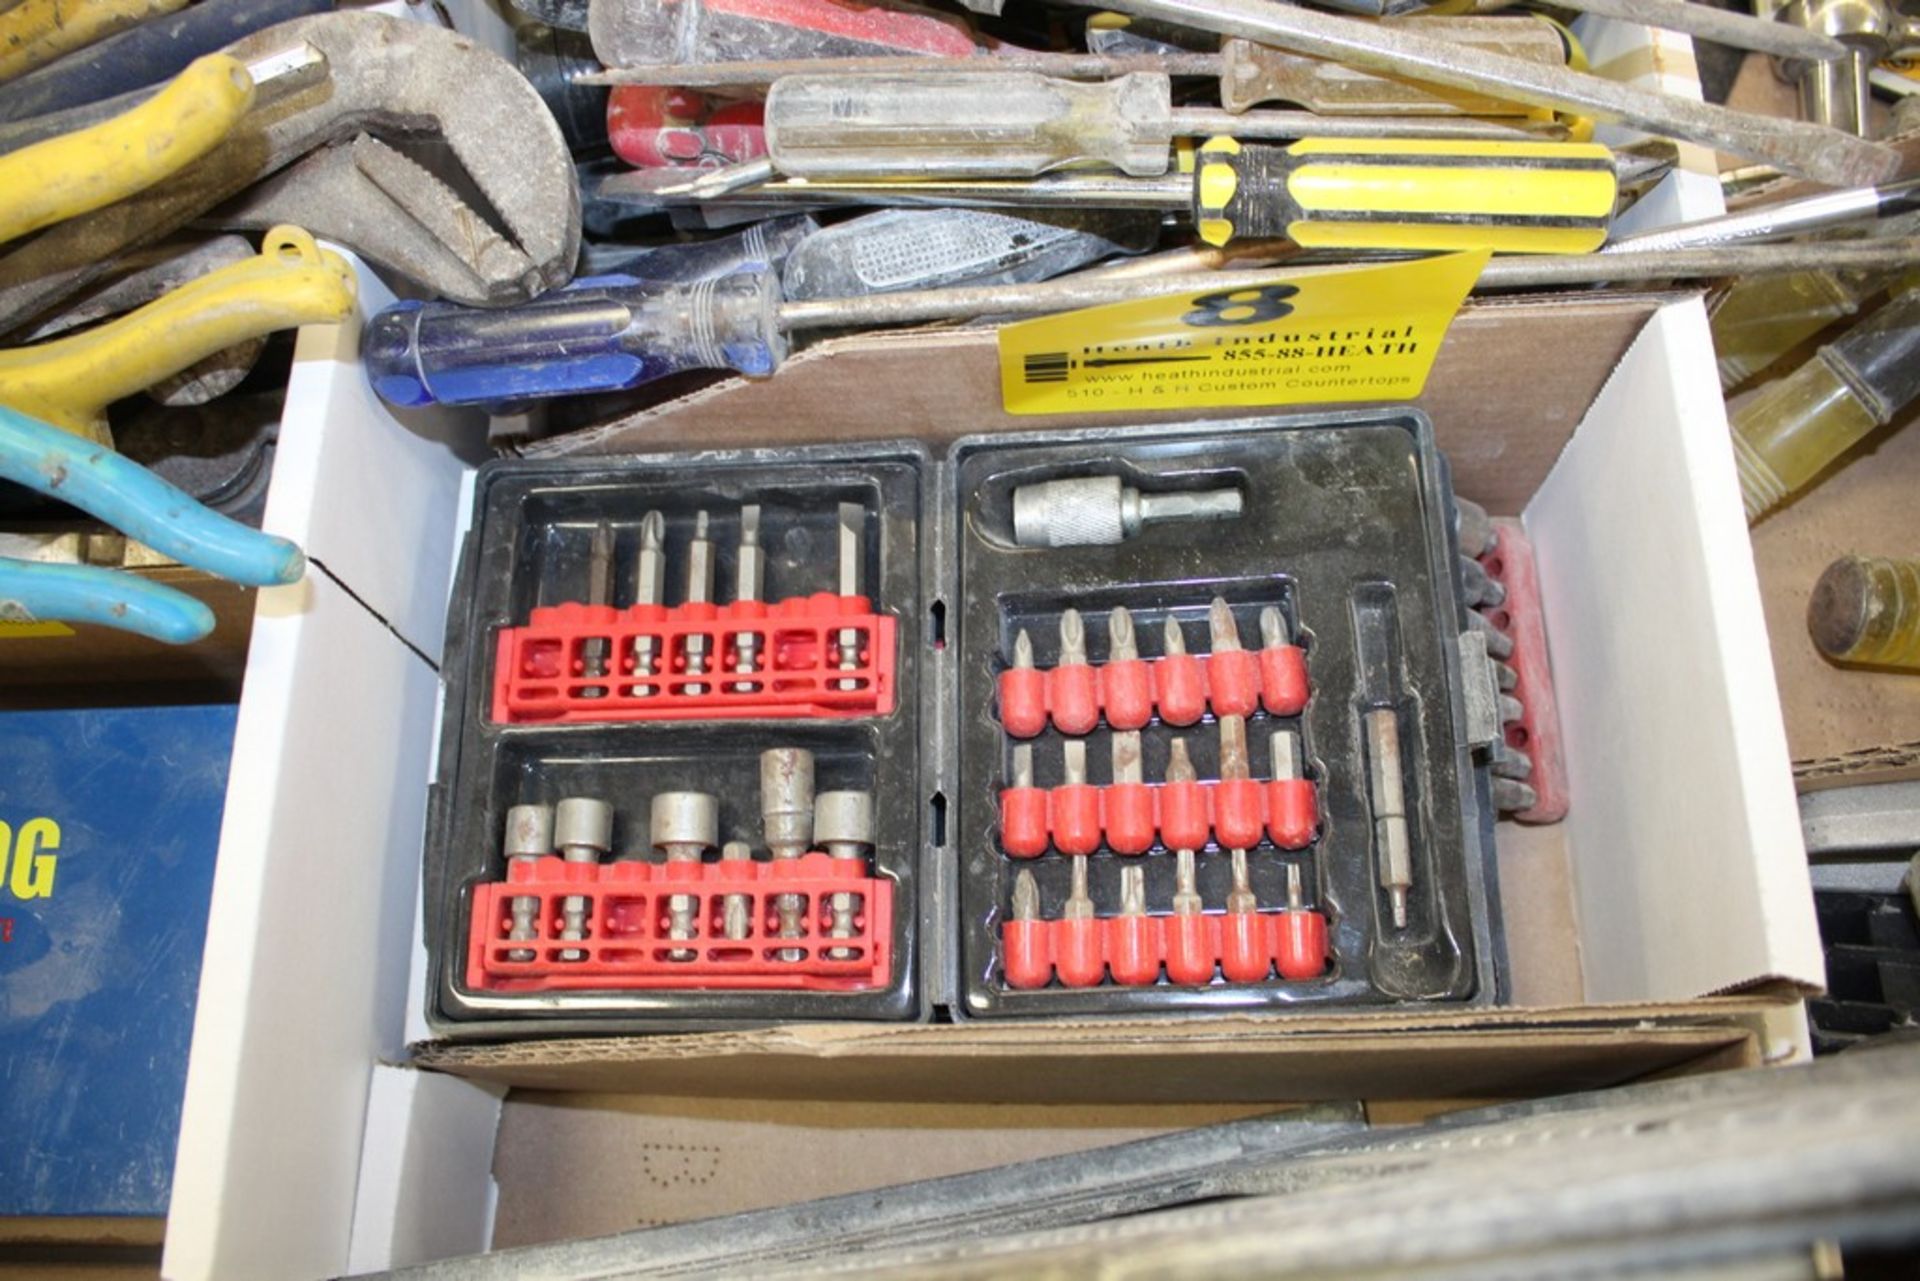 ASSORTED DRIVER BIT SETS IN BOX